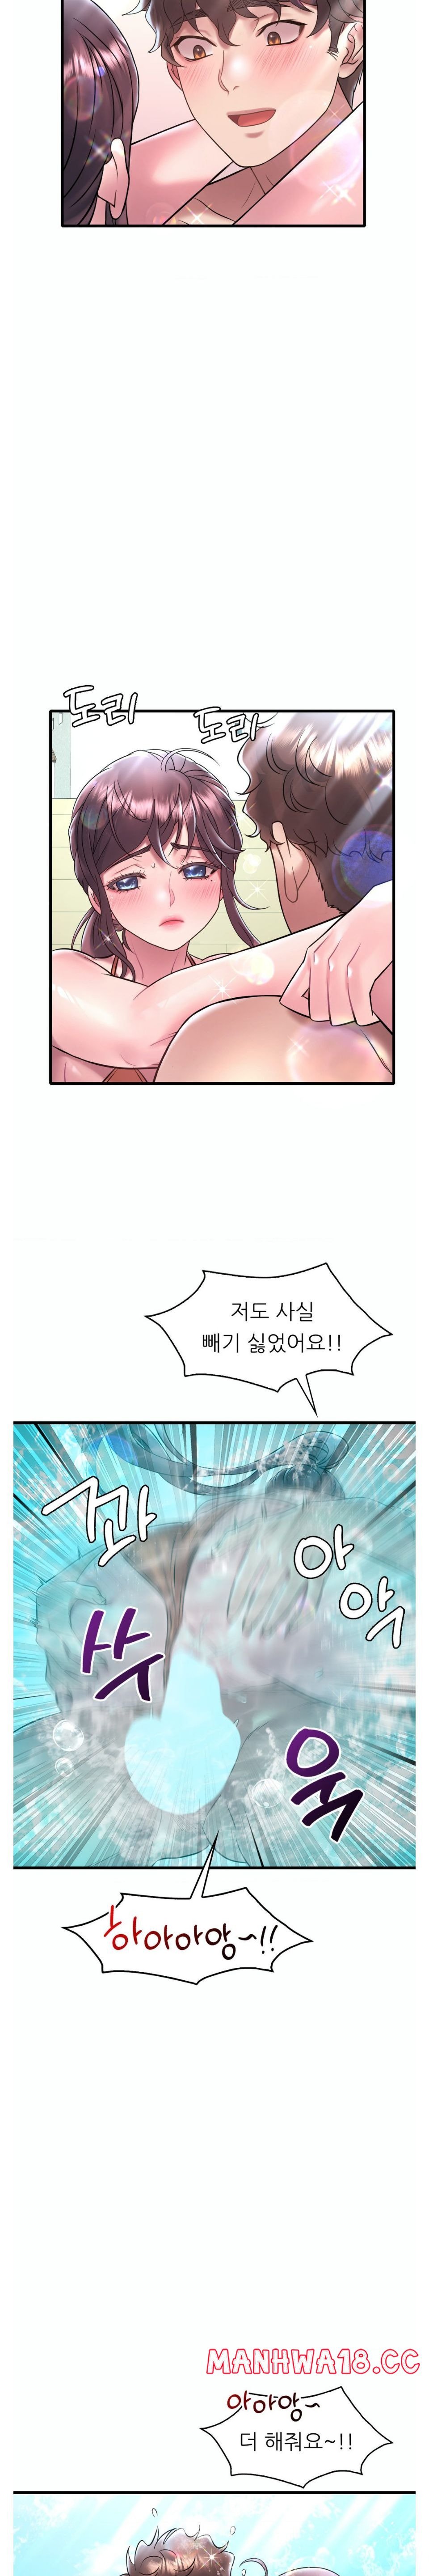 she-wants-to-get-drunk-raw-chap-39-9